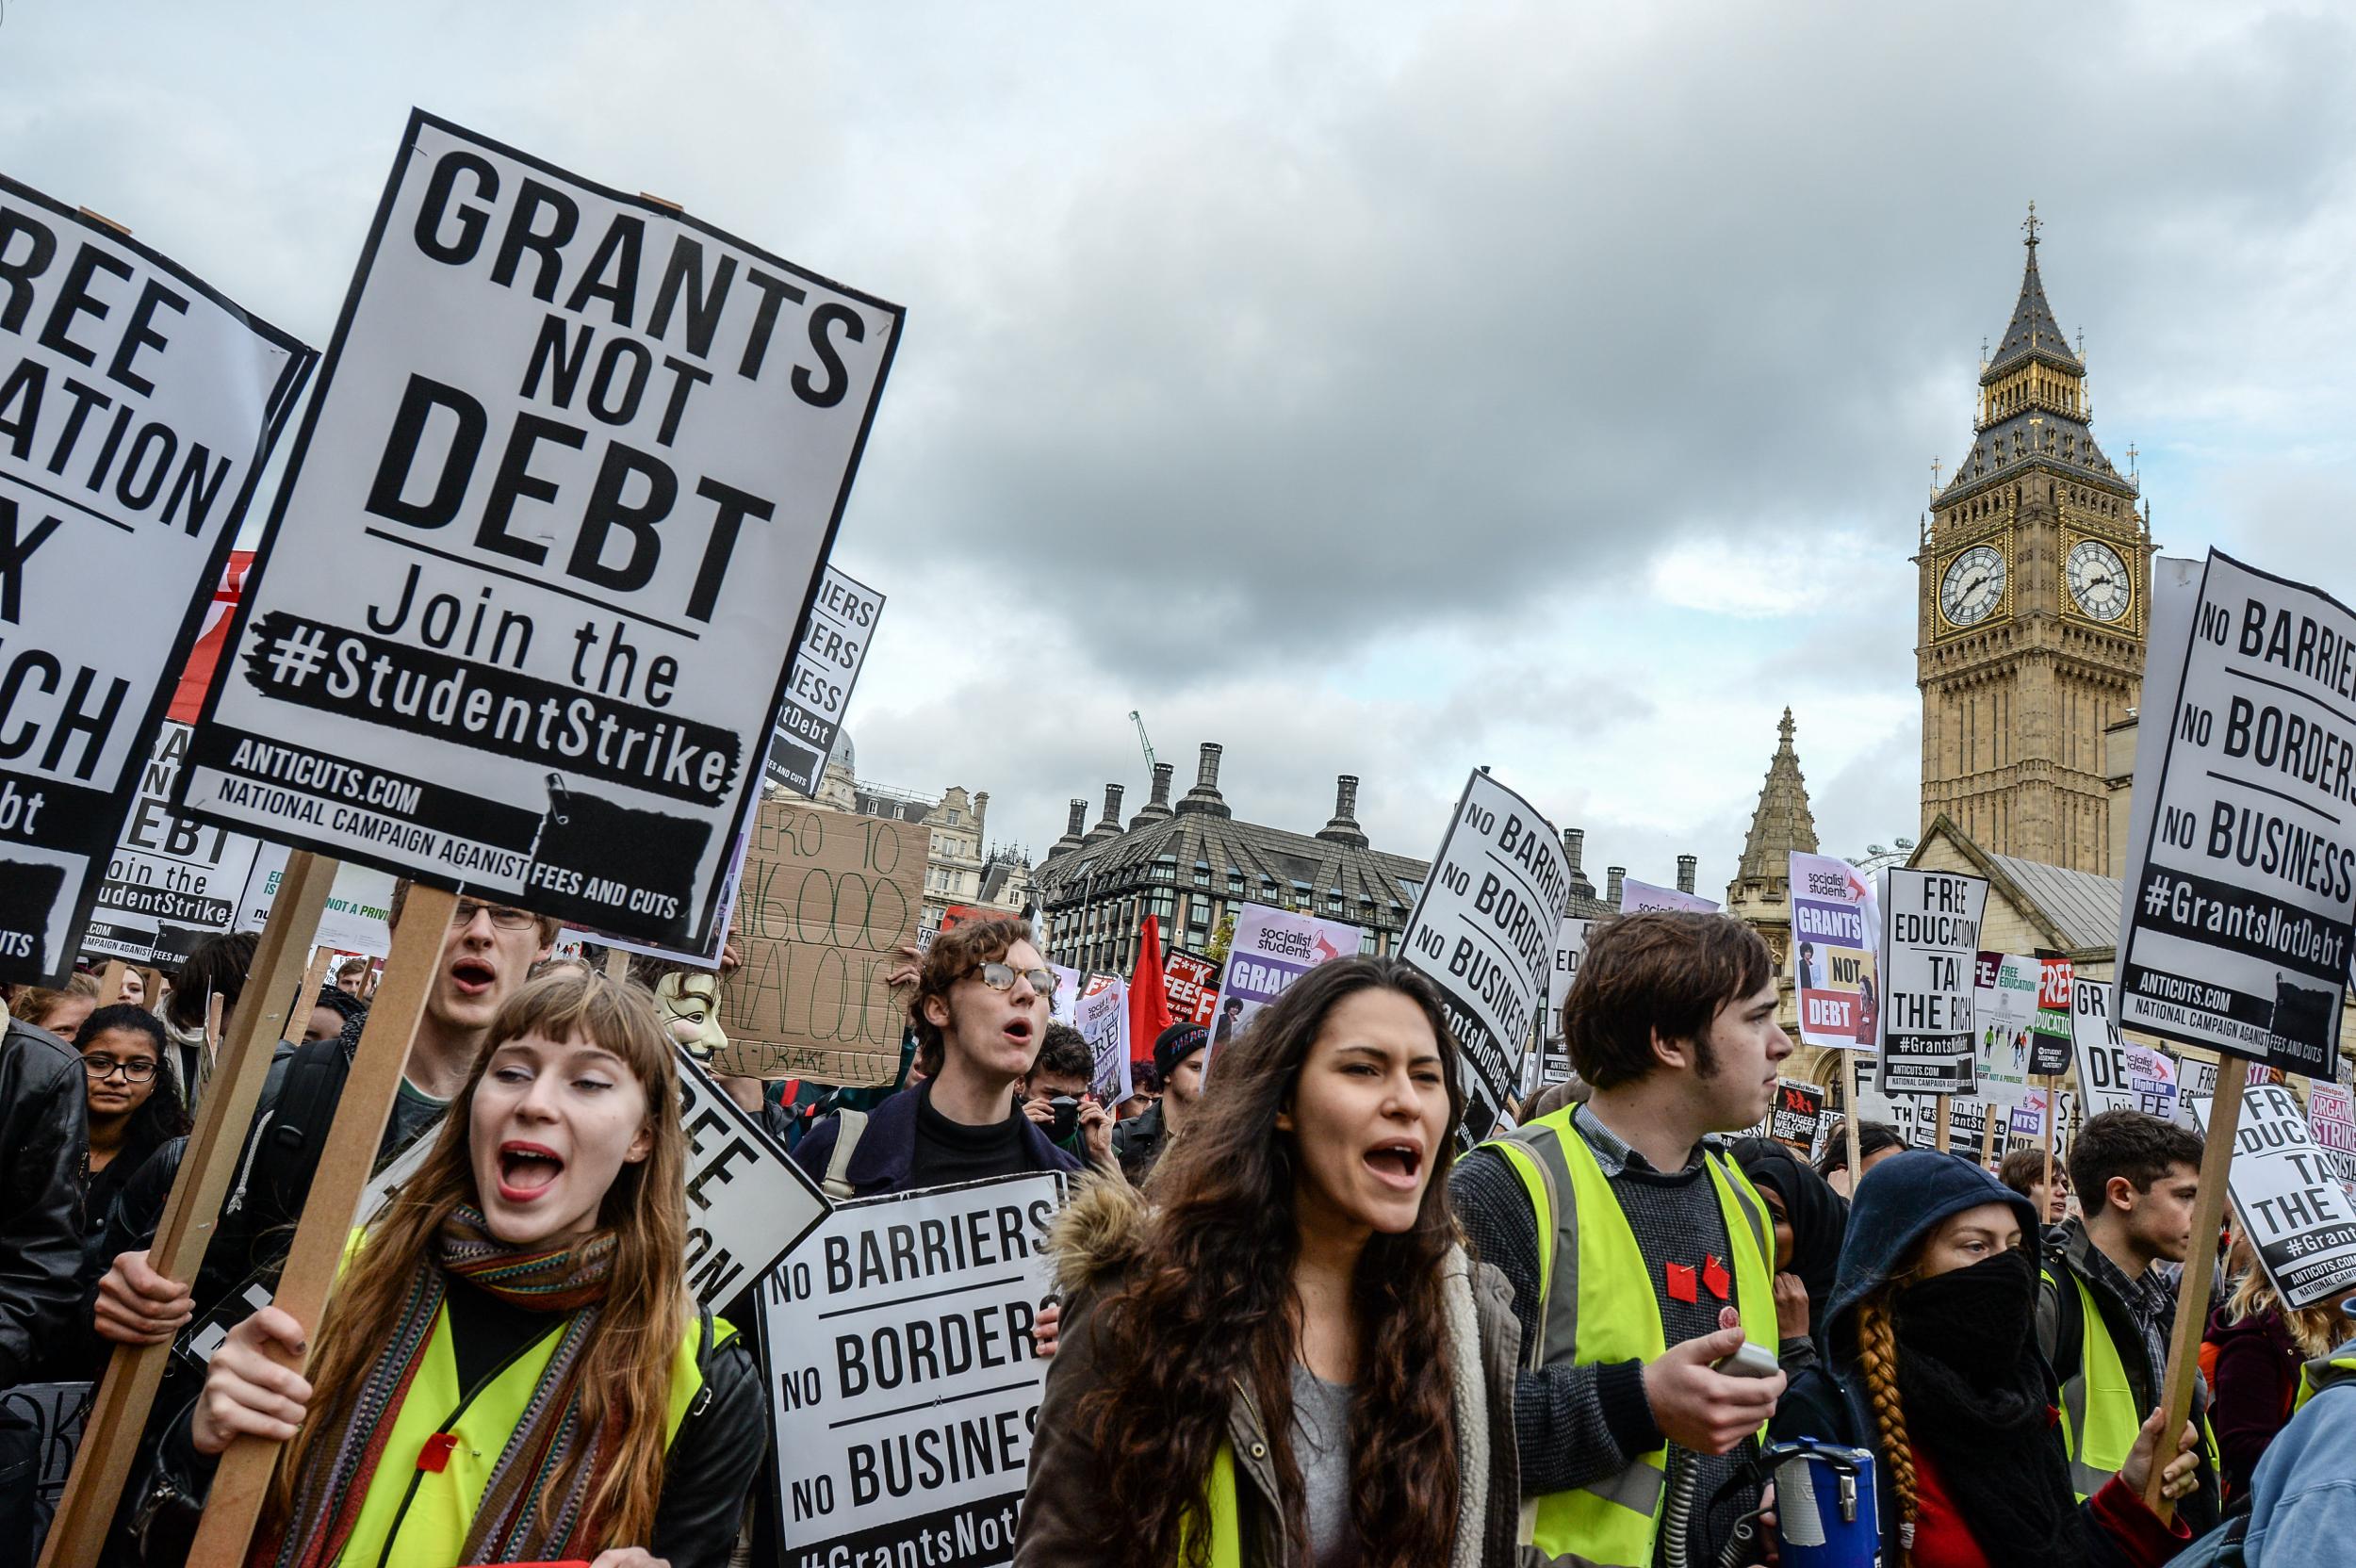 The demo is set to take place one year on from another similar one in the capital, pictured, which saw thousands of students march against cuts to free education